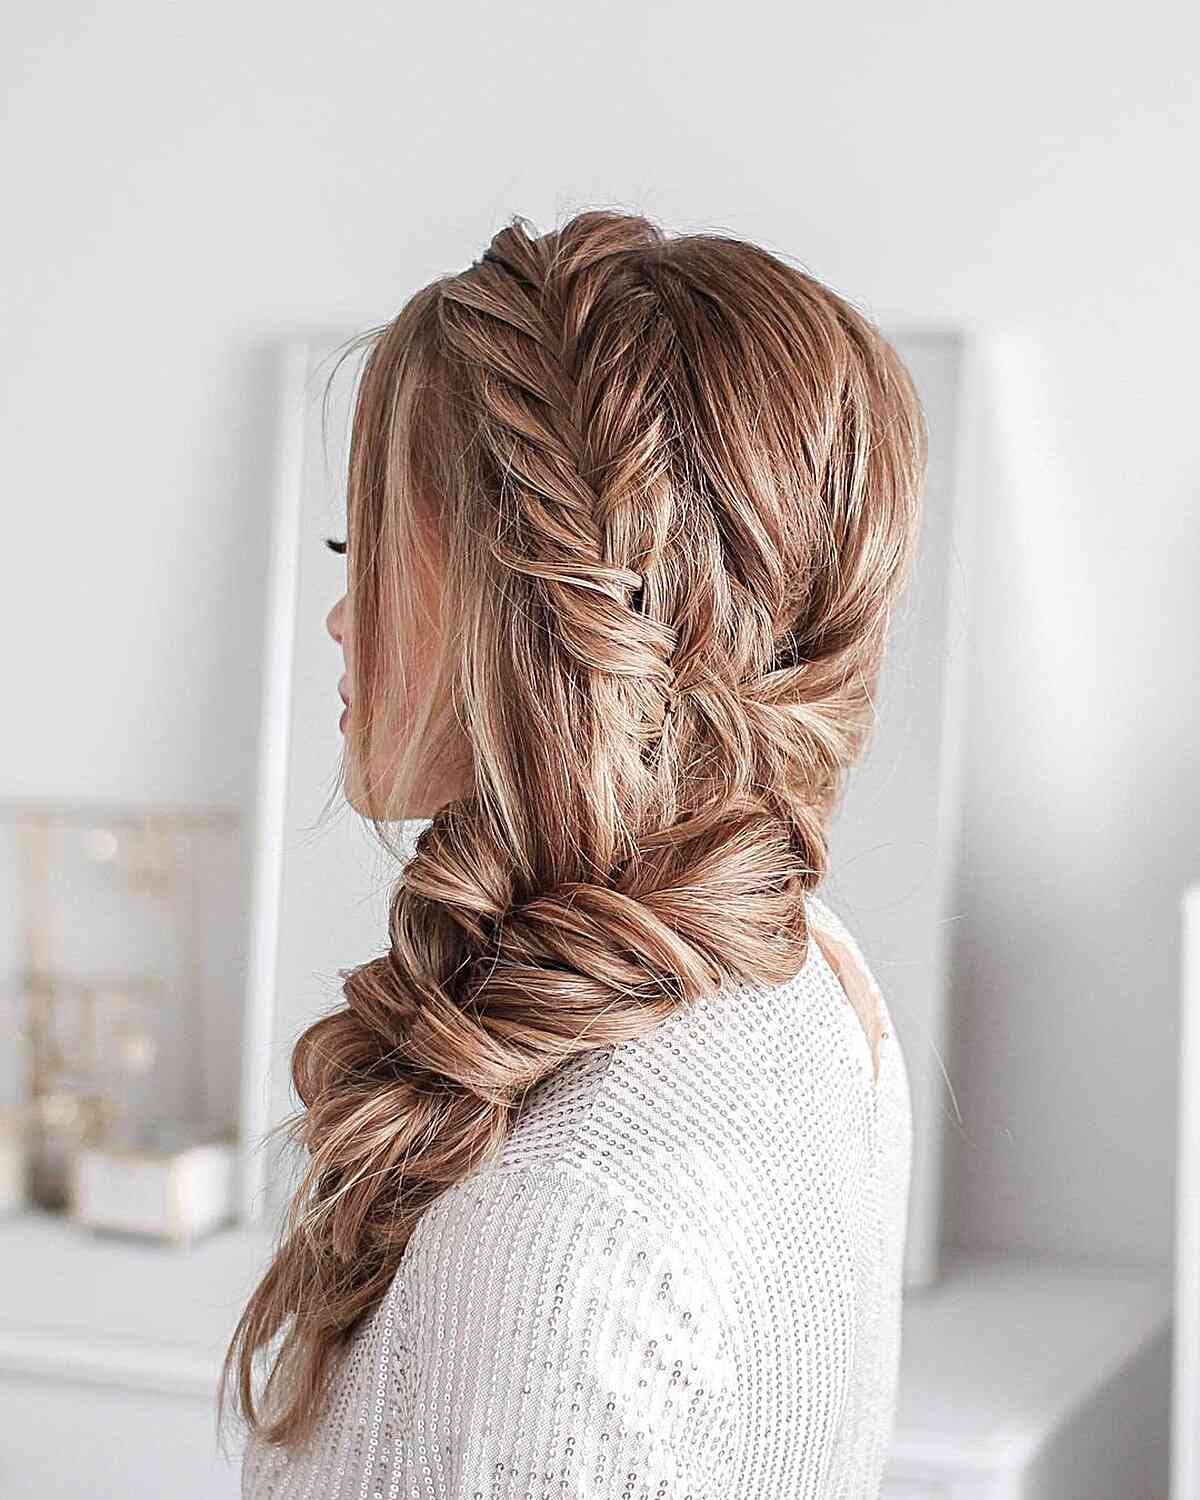 A half updo with a fishtail braid